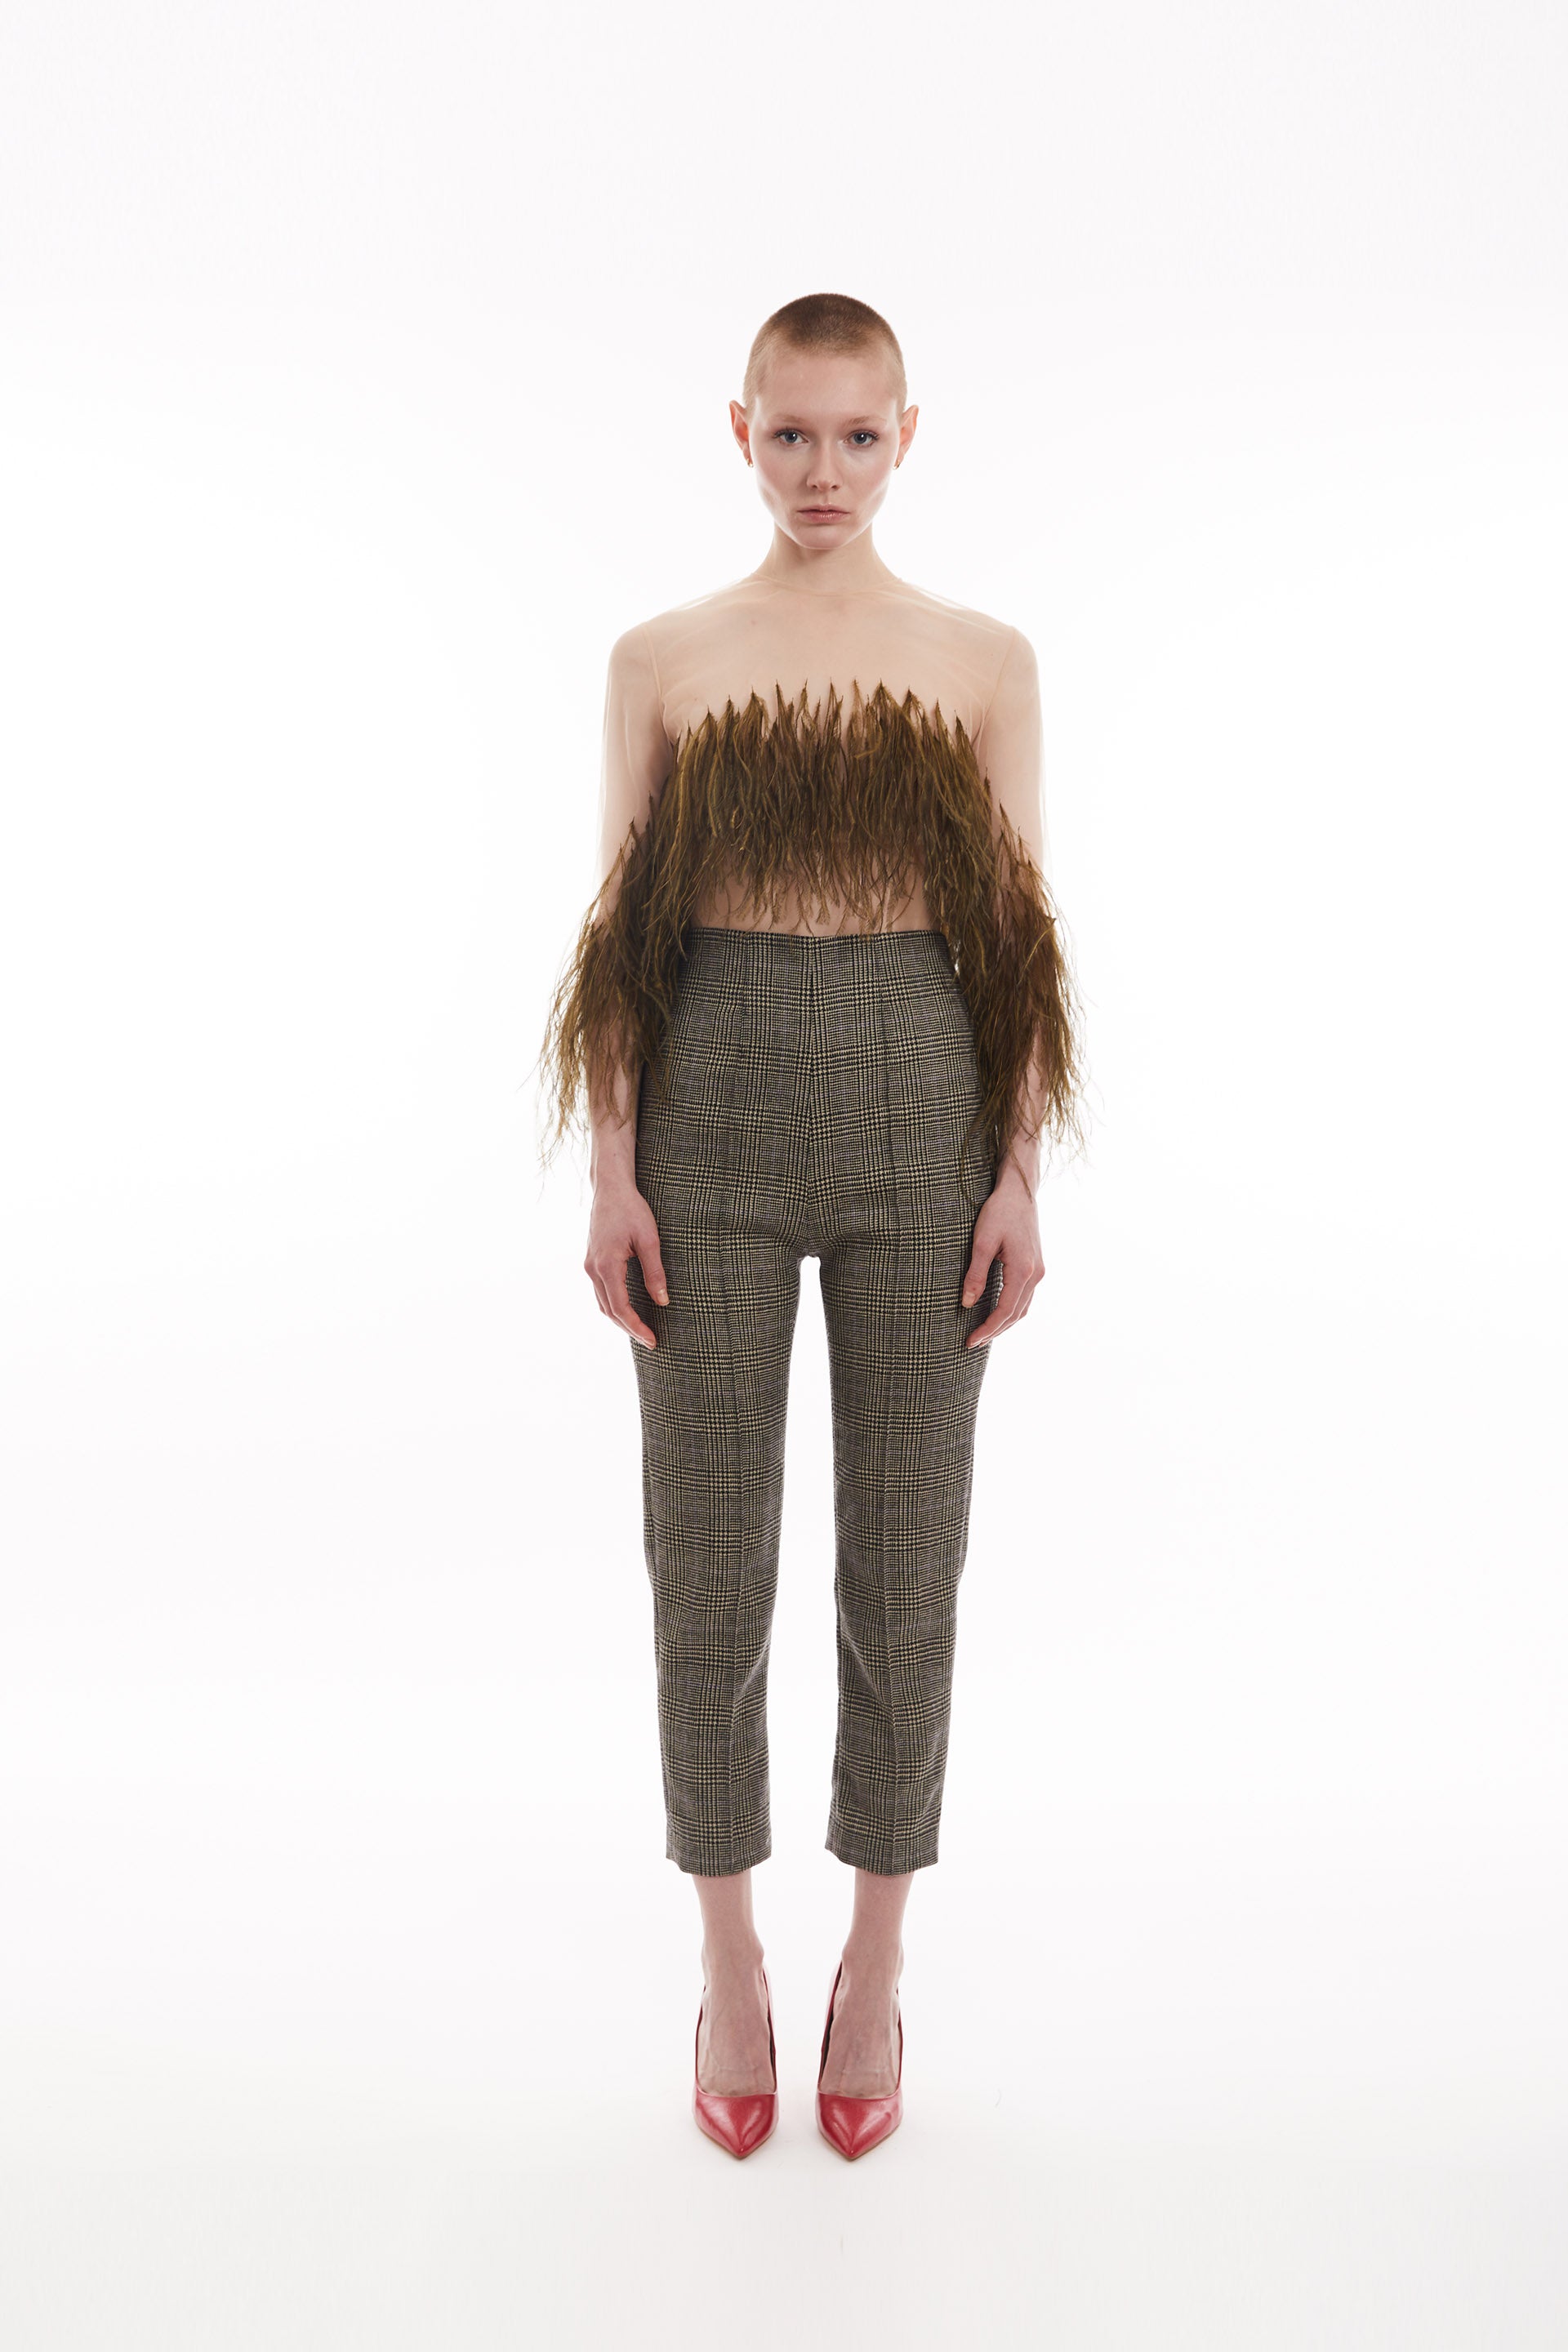 Cropped feather-trimmed tulle top